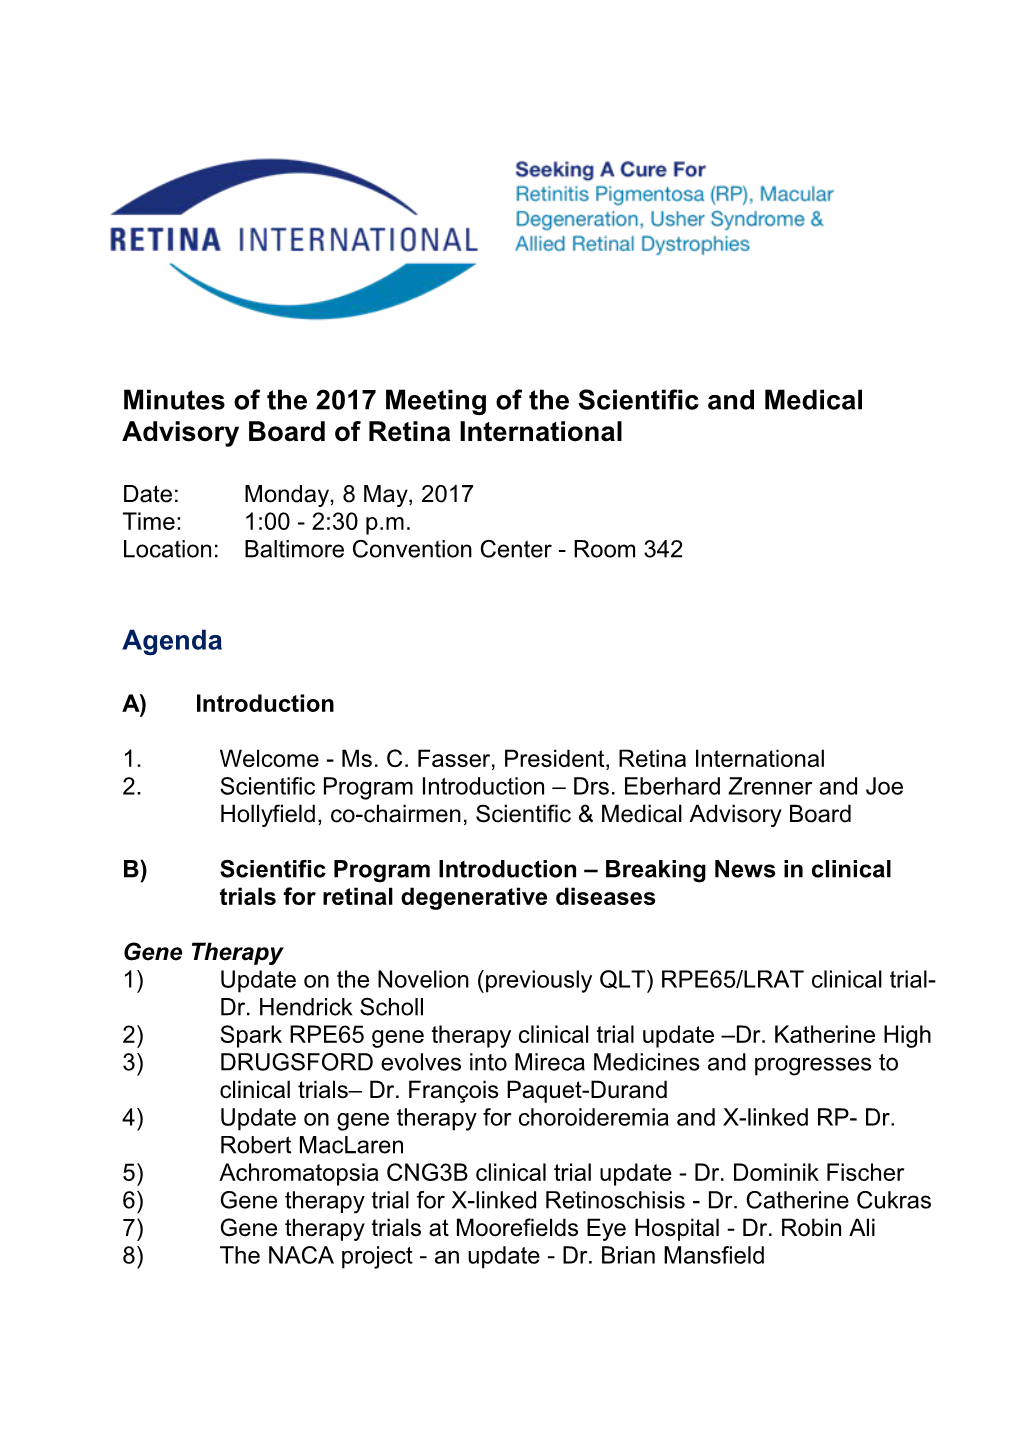 Minutes of the 2017 Meeting of the Scientific and Medical Advisory Board of Retina